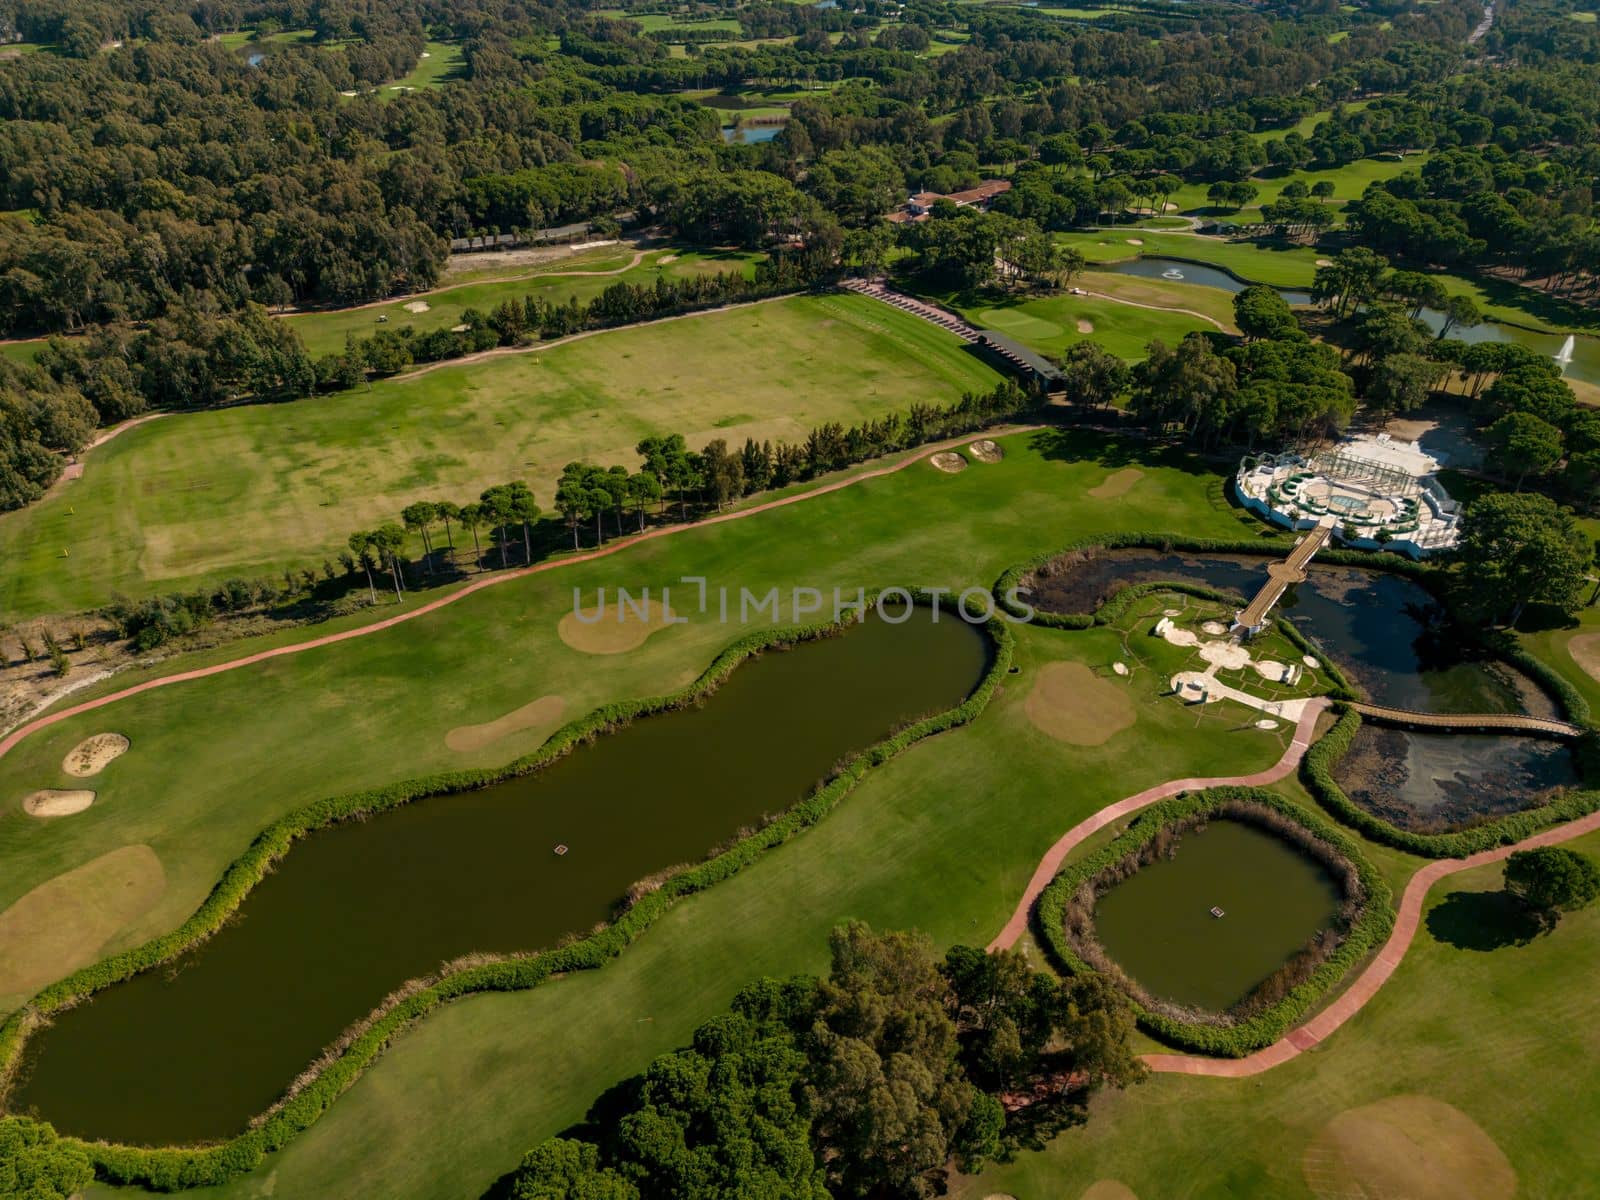 Aerial view of the golf course in Antalya Belek at sunset